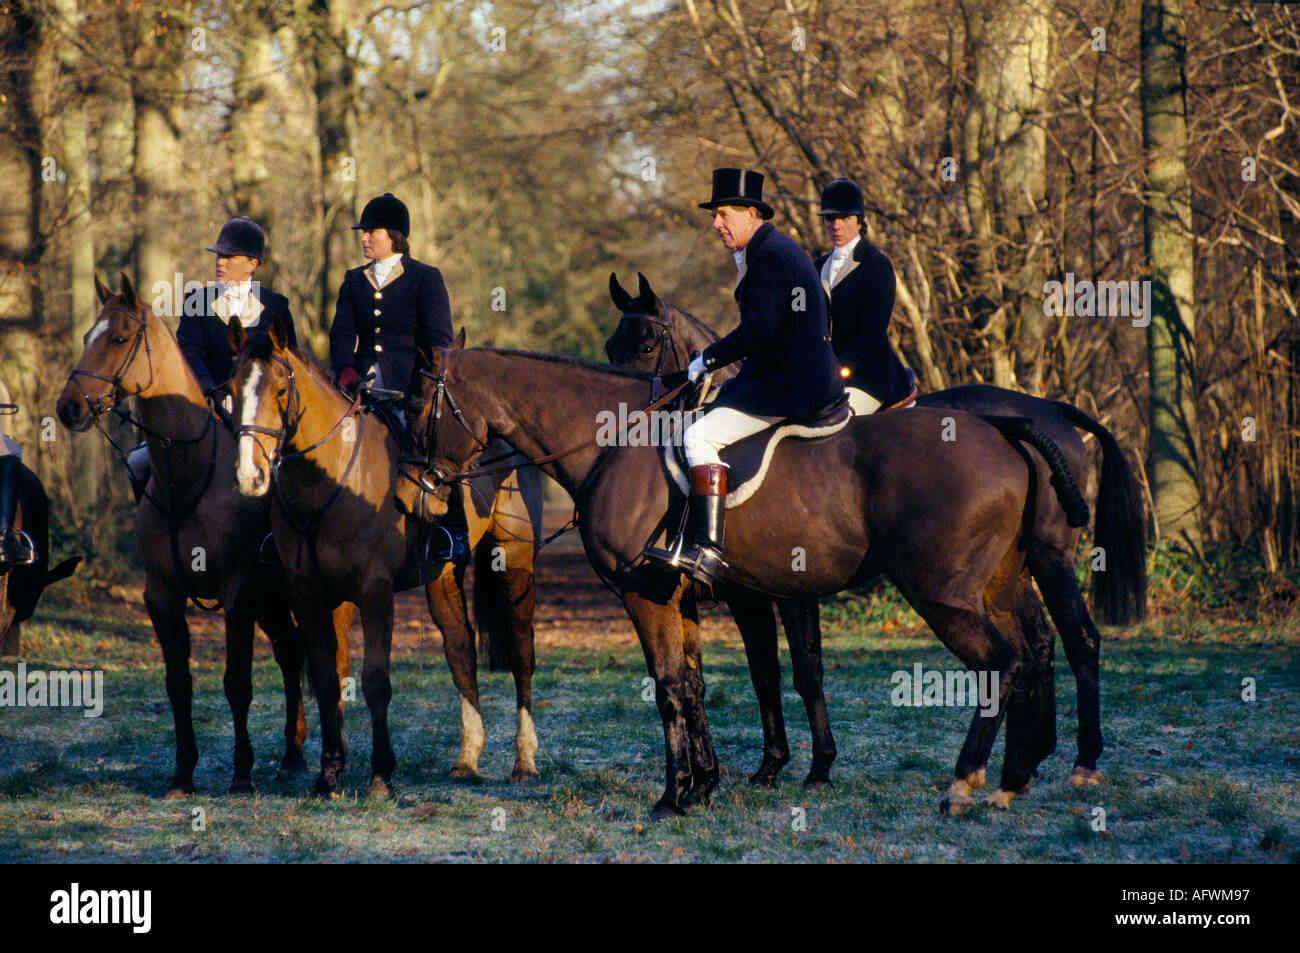 Duke of Beaufort Hunt Badminton Gloucestershire Group of women wearing traditional Blue and Buff top coats riding hat man in top hat 1980s HOMER SYKES Stock Photo